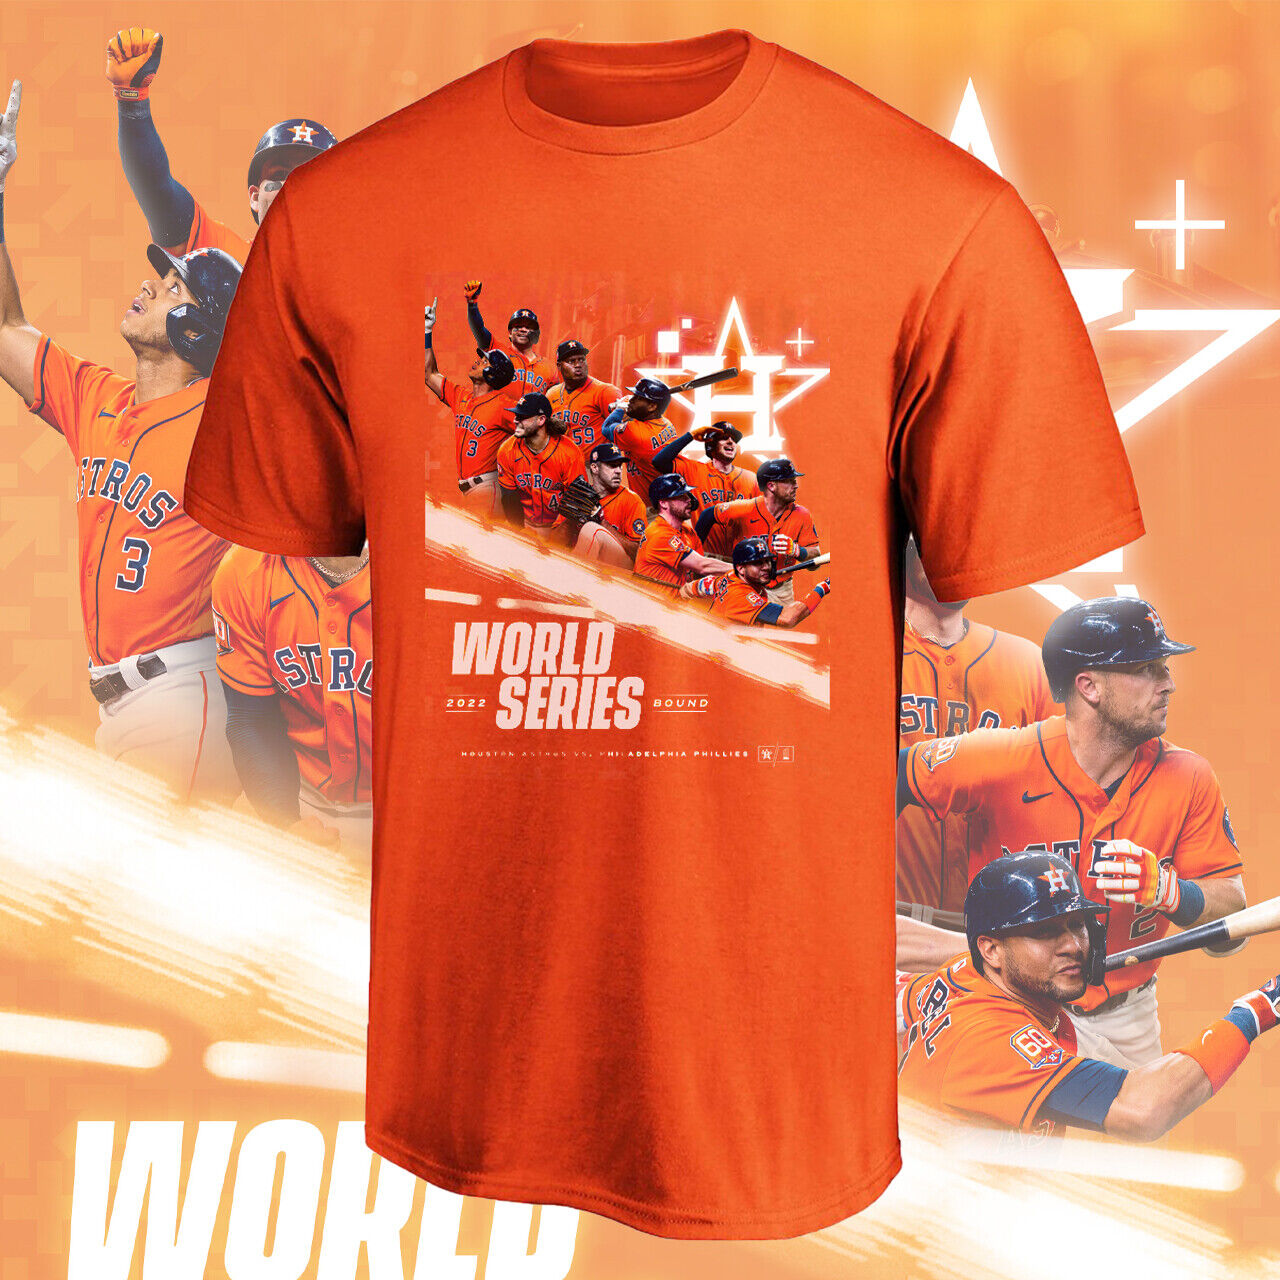 Houston Astros 2022 World Baseball Series Finals Champs T-shirt Plus Size Up To 5xl